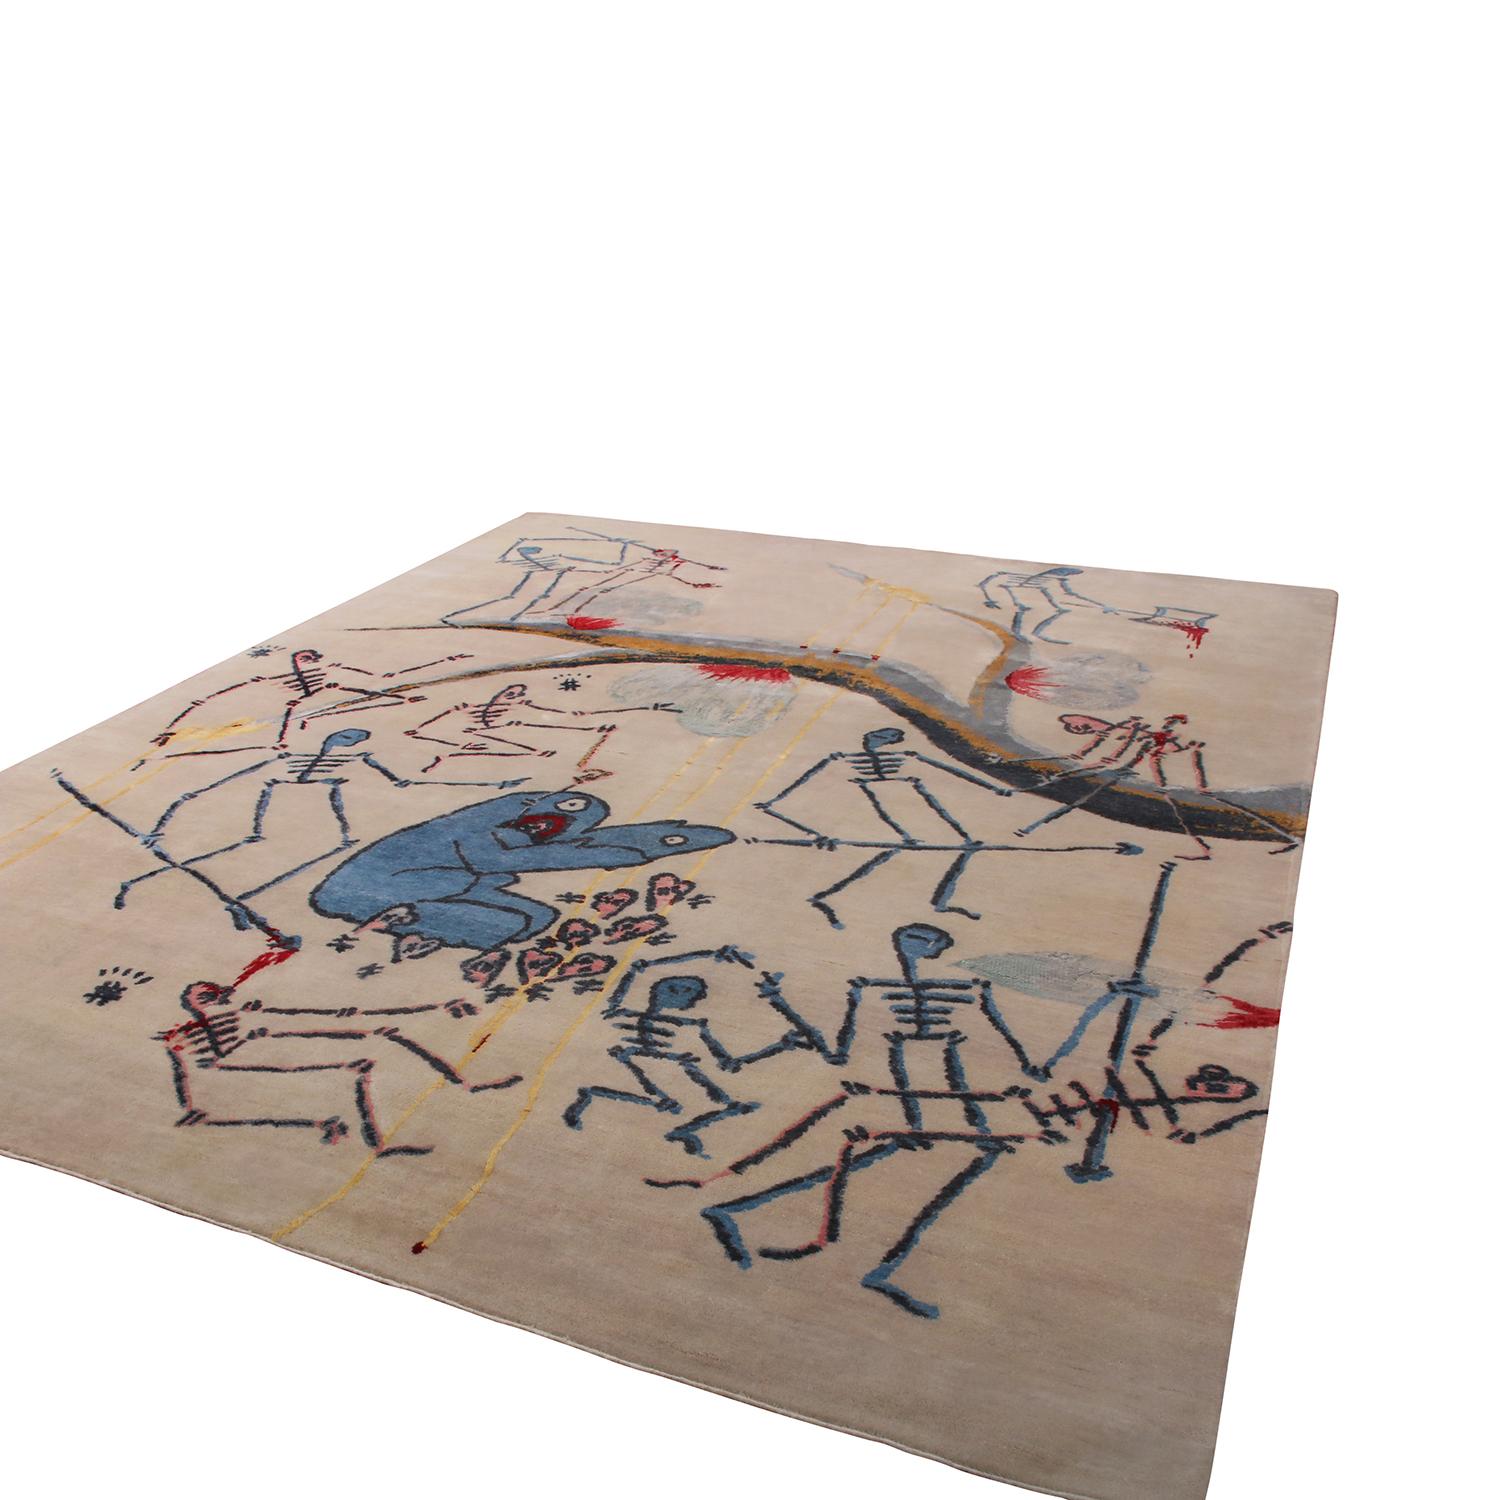 Hand knotted with wool, natural silk and a variety of exotic yarn, this item represents a collaboration between the work of celebrated modern artist Gianni Lee with Rug & Kilim’s custom collection, as well as one of the team’s most ambitious